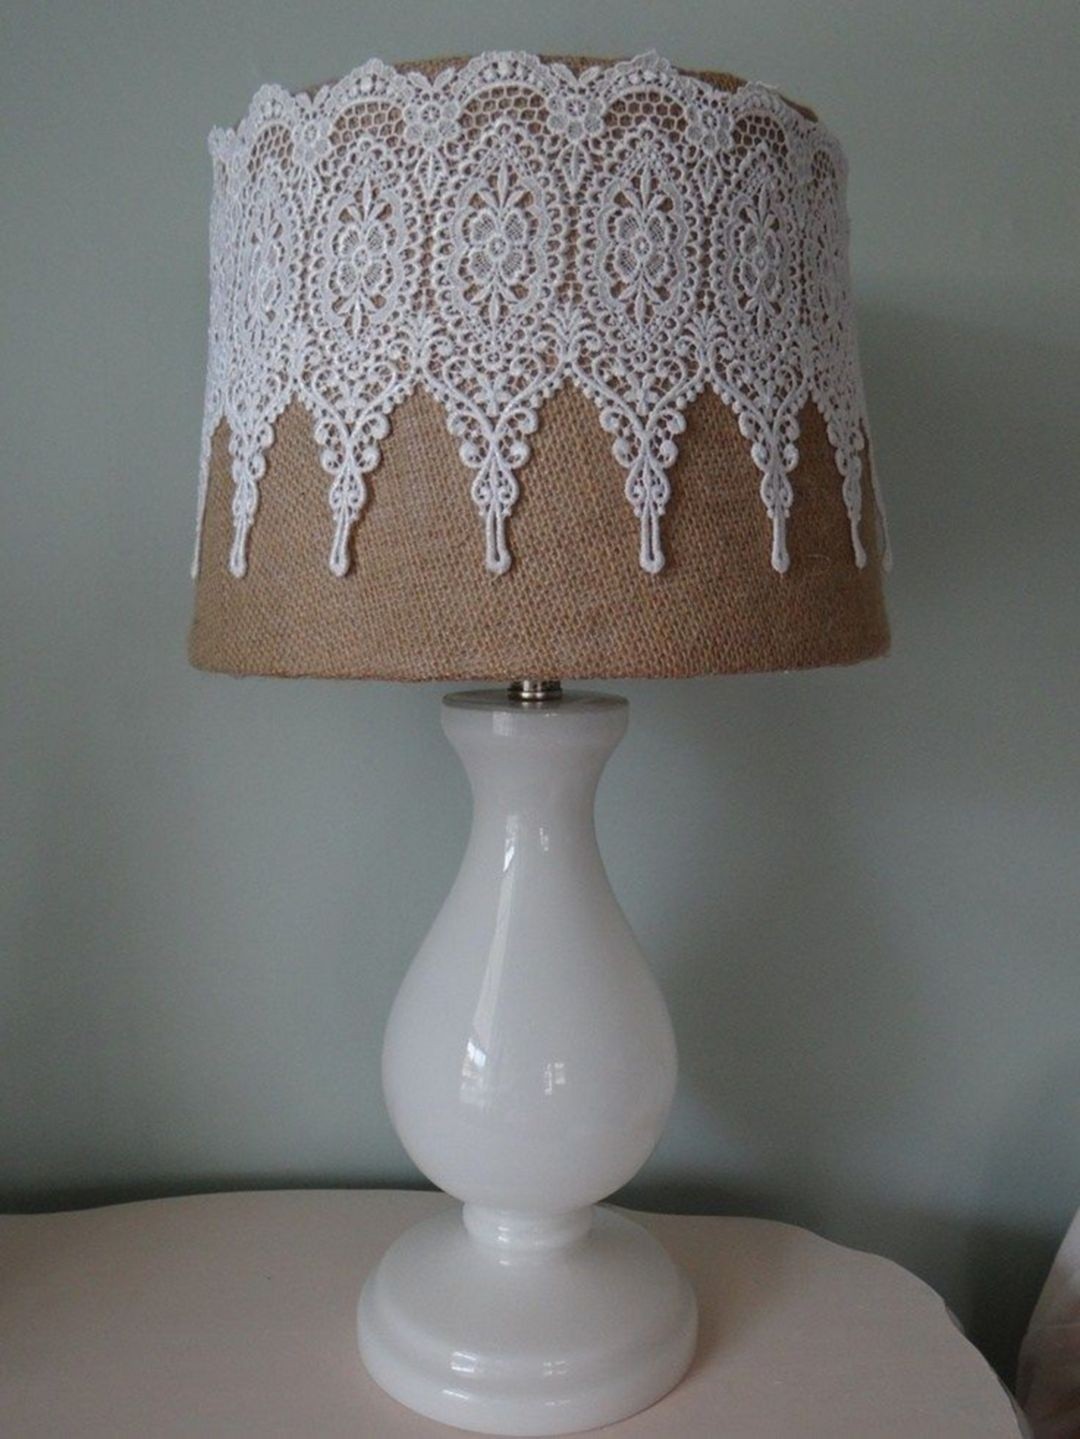 Shabby chic lamp shades ideas 26 home and apartment ideas